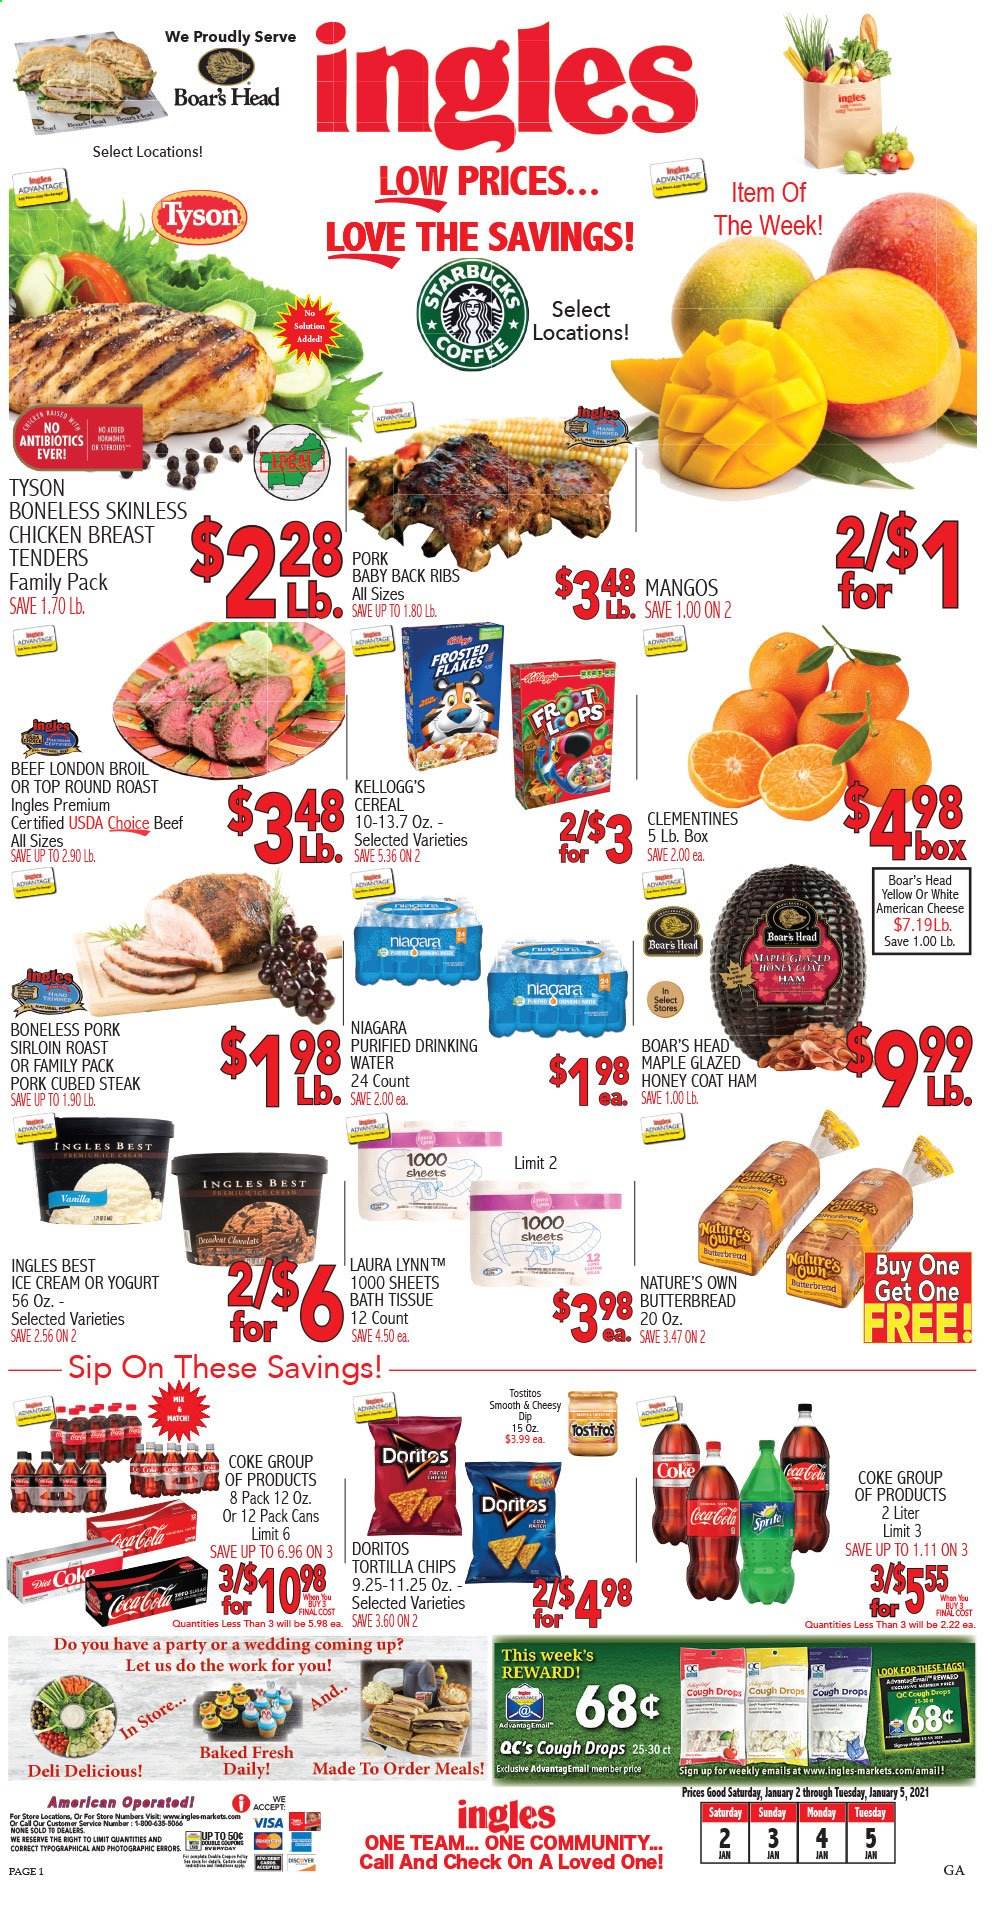 thumbnail - Ingles Flyer - 01/02/2021 - 01/05/2021 - Sales products - ham, american cheese, cheese, yoghurt, dip, ice cream, mango, Kellogg's, Doritos, tortilla chips, chips, Tostitos, cereals, honey, Coca-Cola, Sprite, coffee, chicken breasts, beef meat, steak, round roast, pork loin, pork meat, pork back ribs, bath tissue, Nature's Own, cough drops. Page 1.